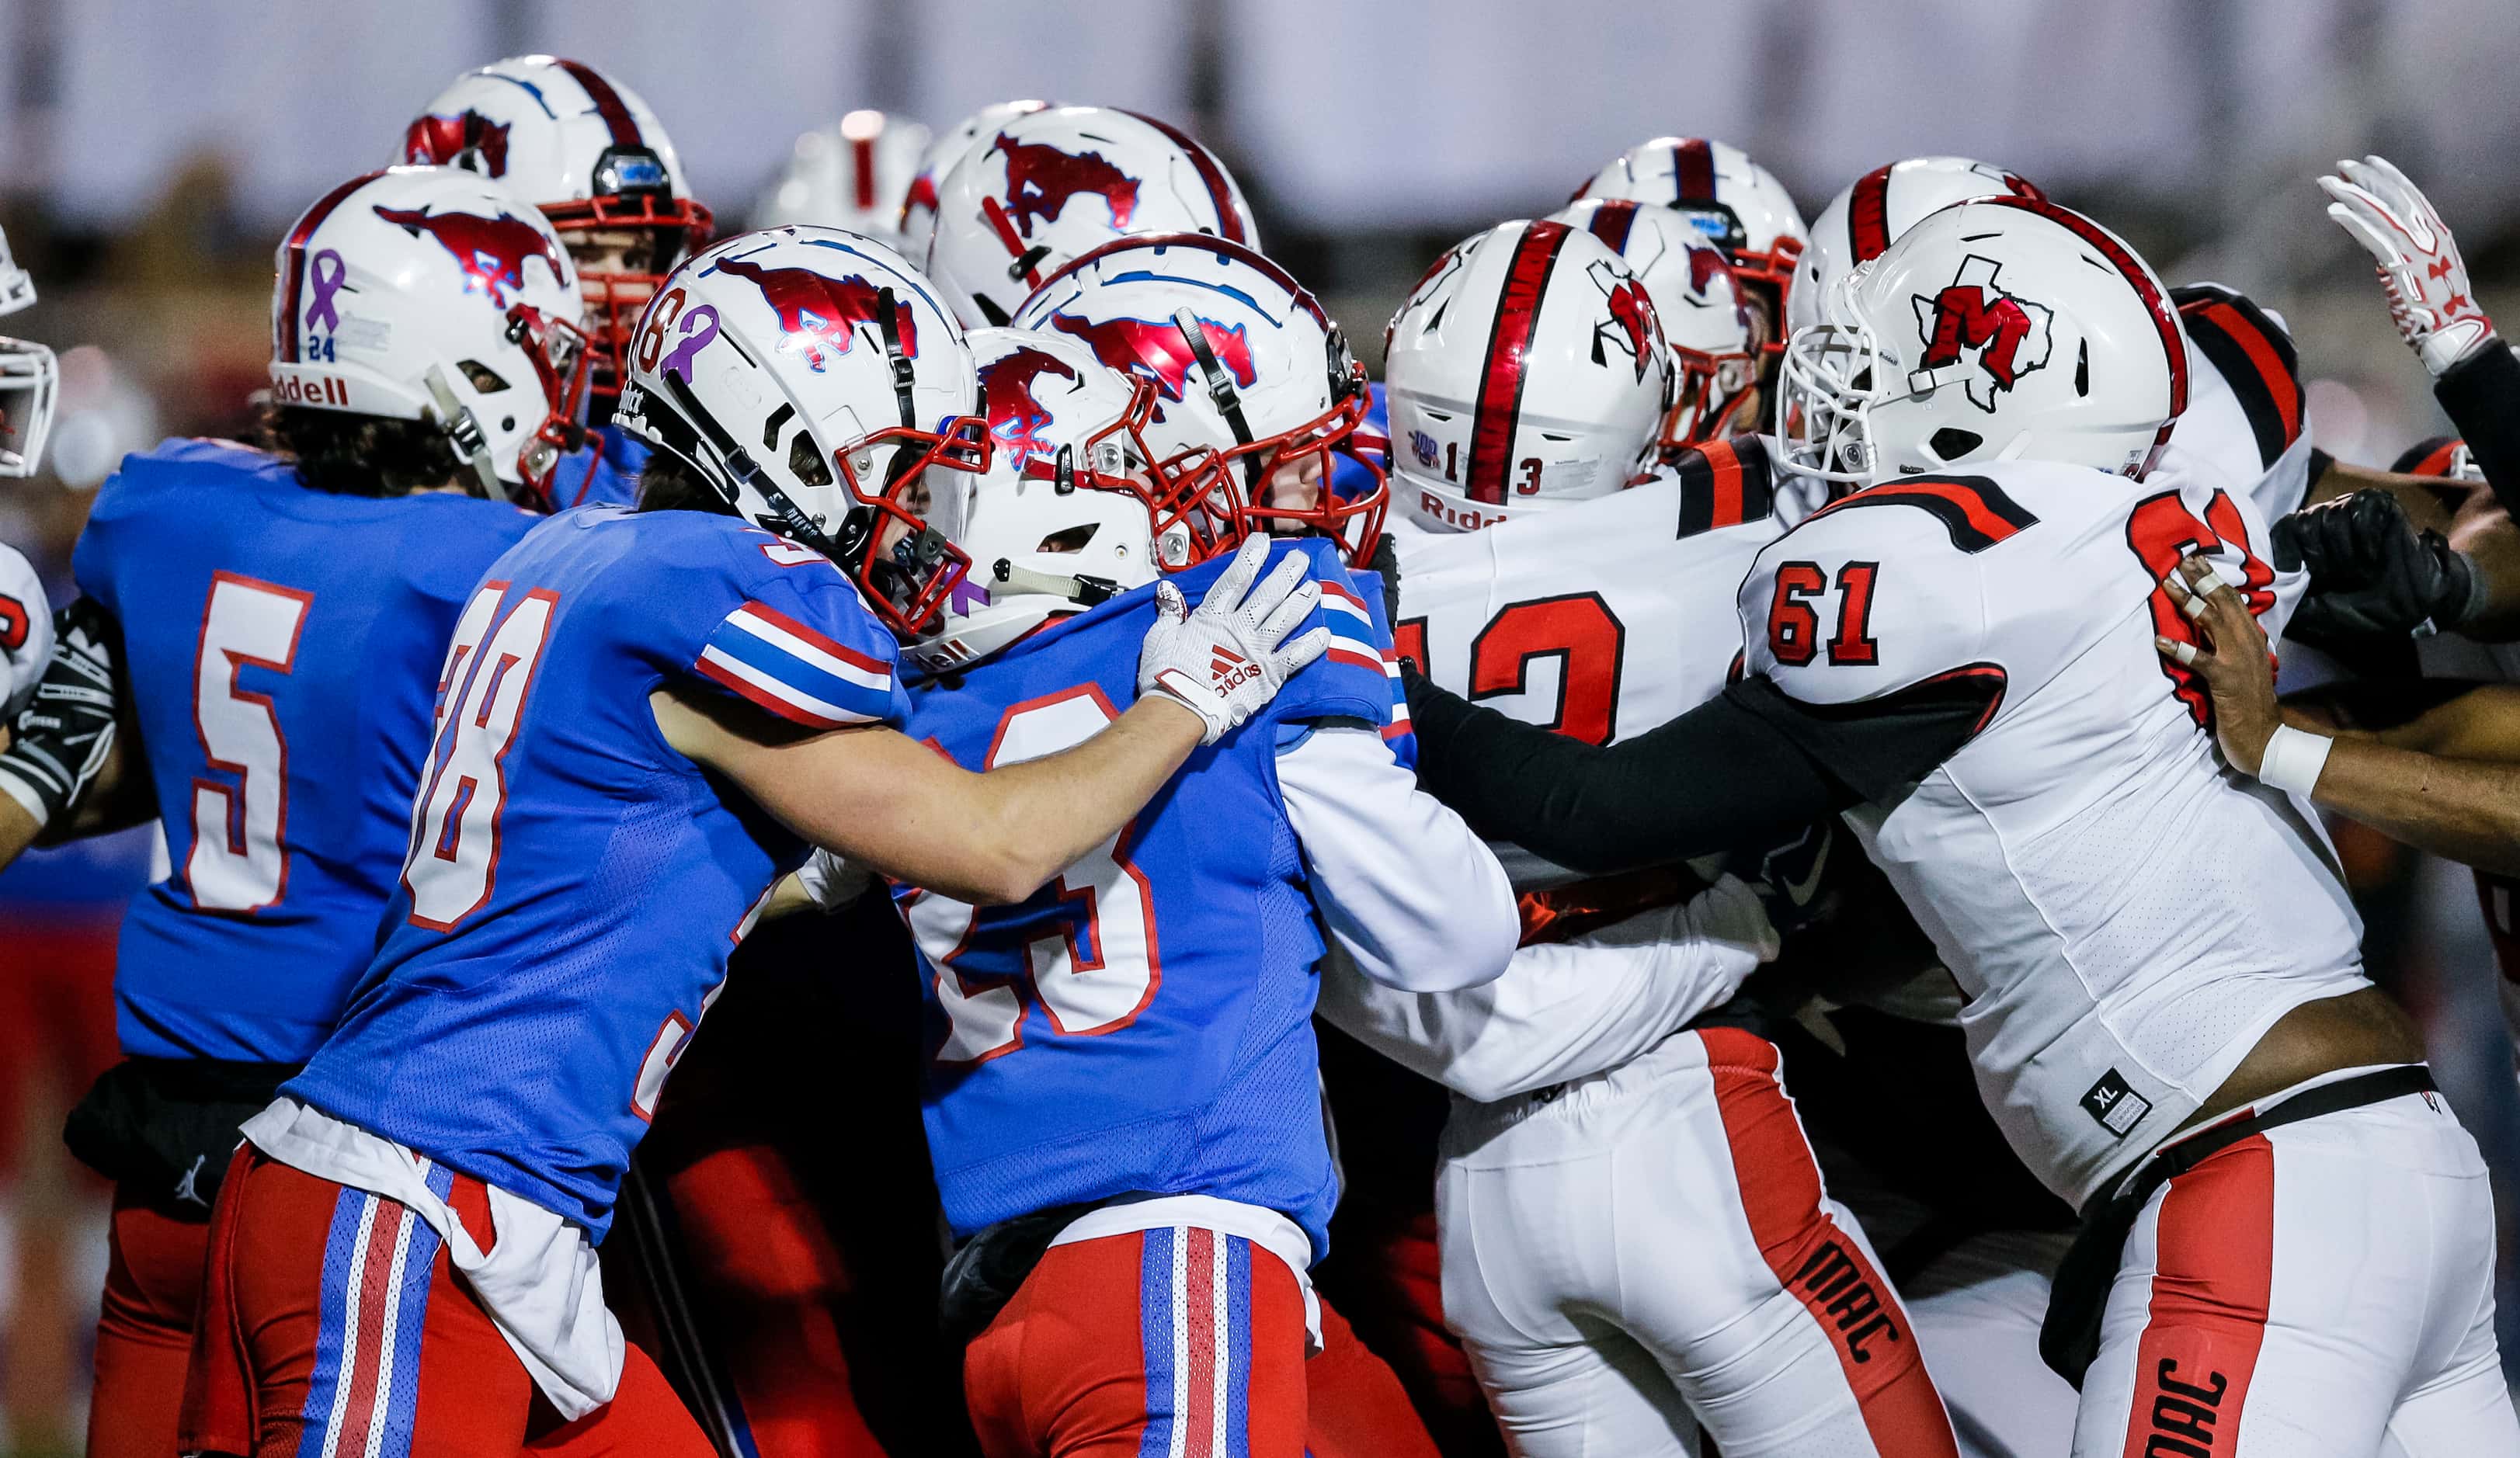 JJ Pearce defenders push back against the Irving MacArthur offense during the first half of...